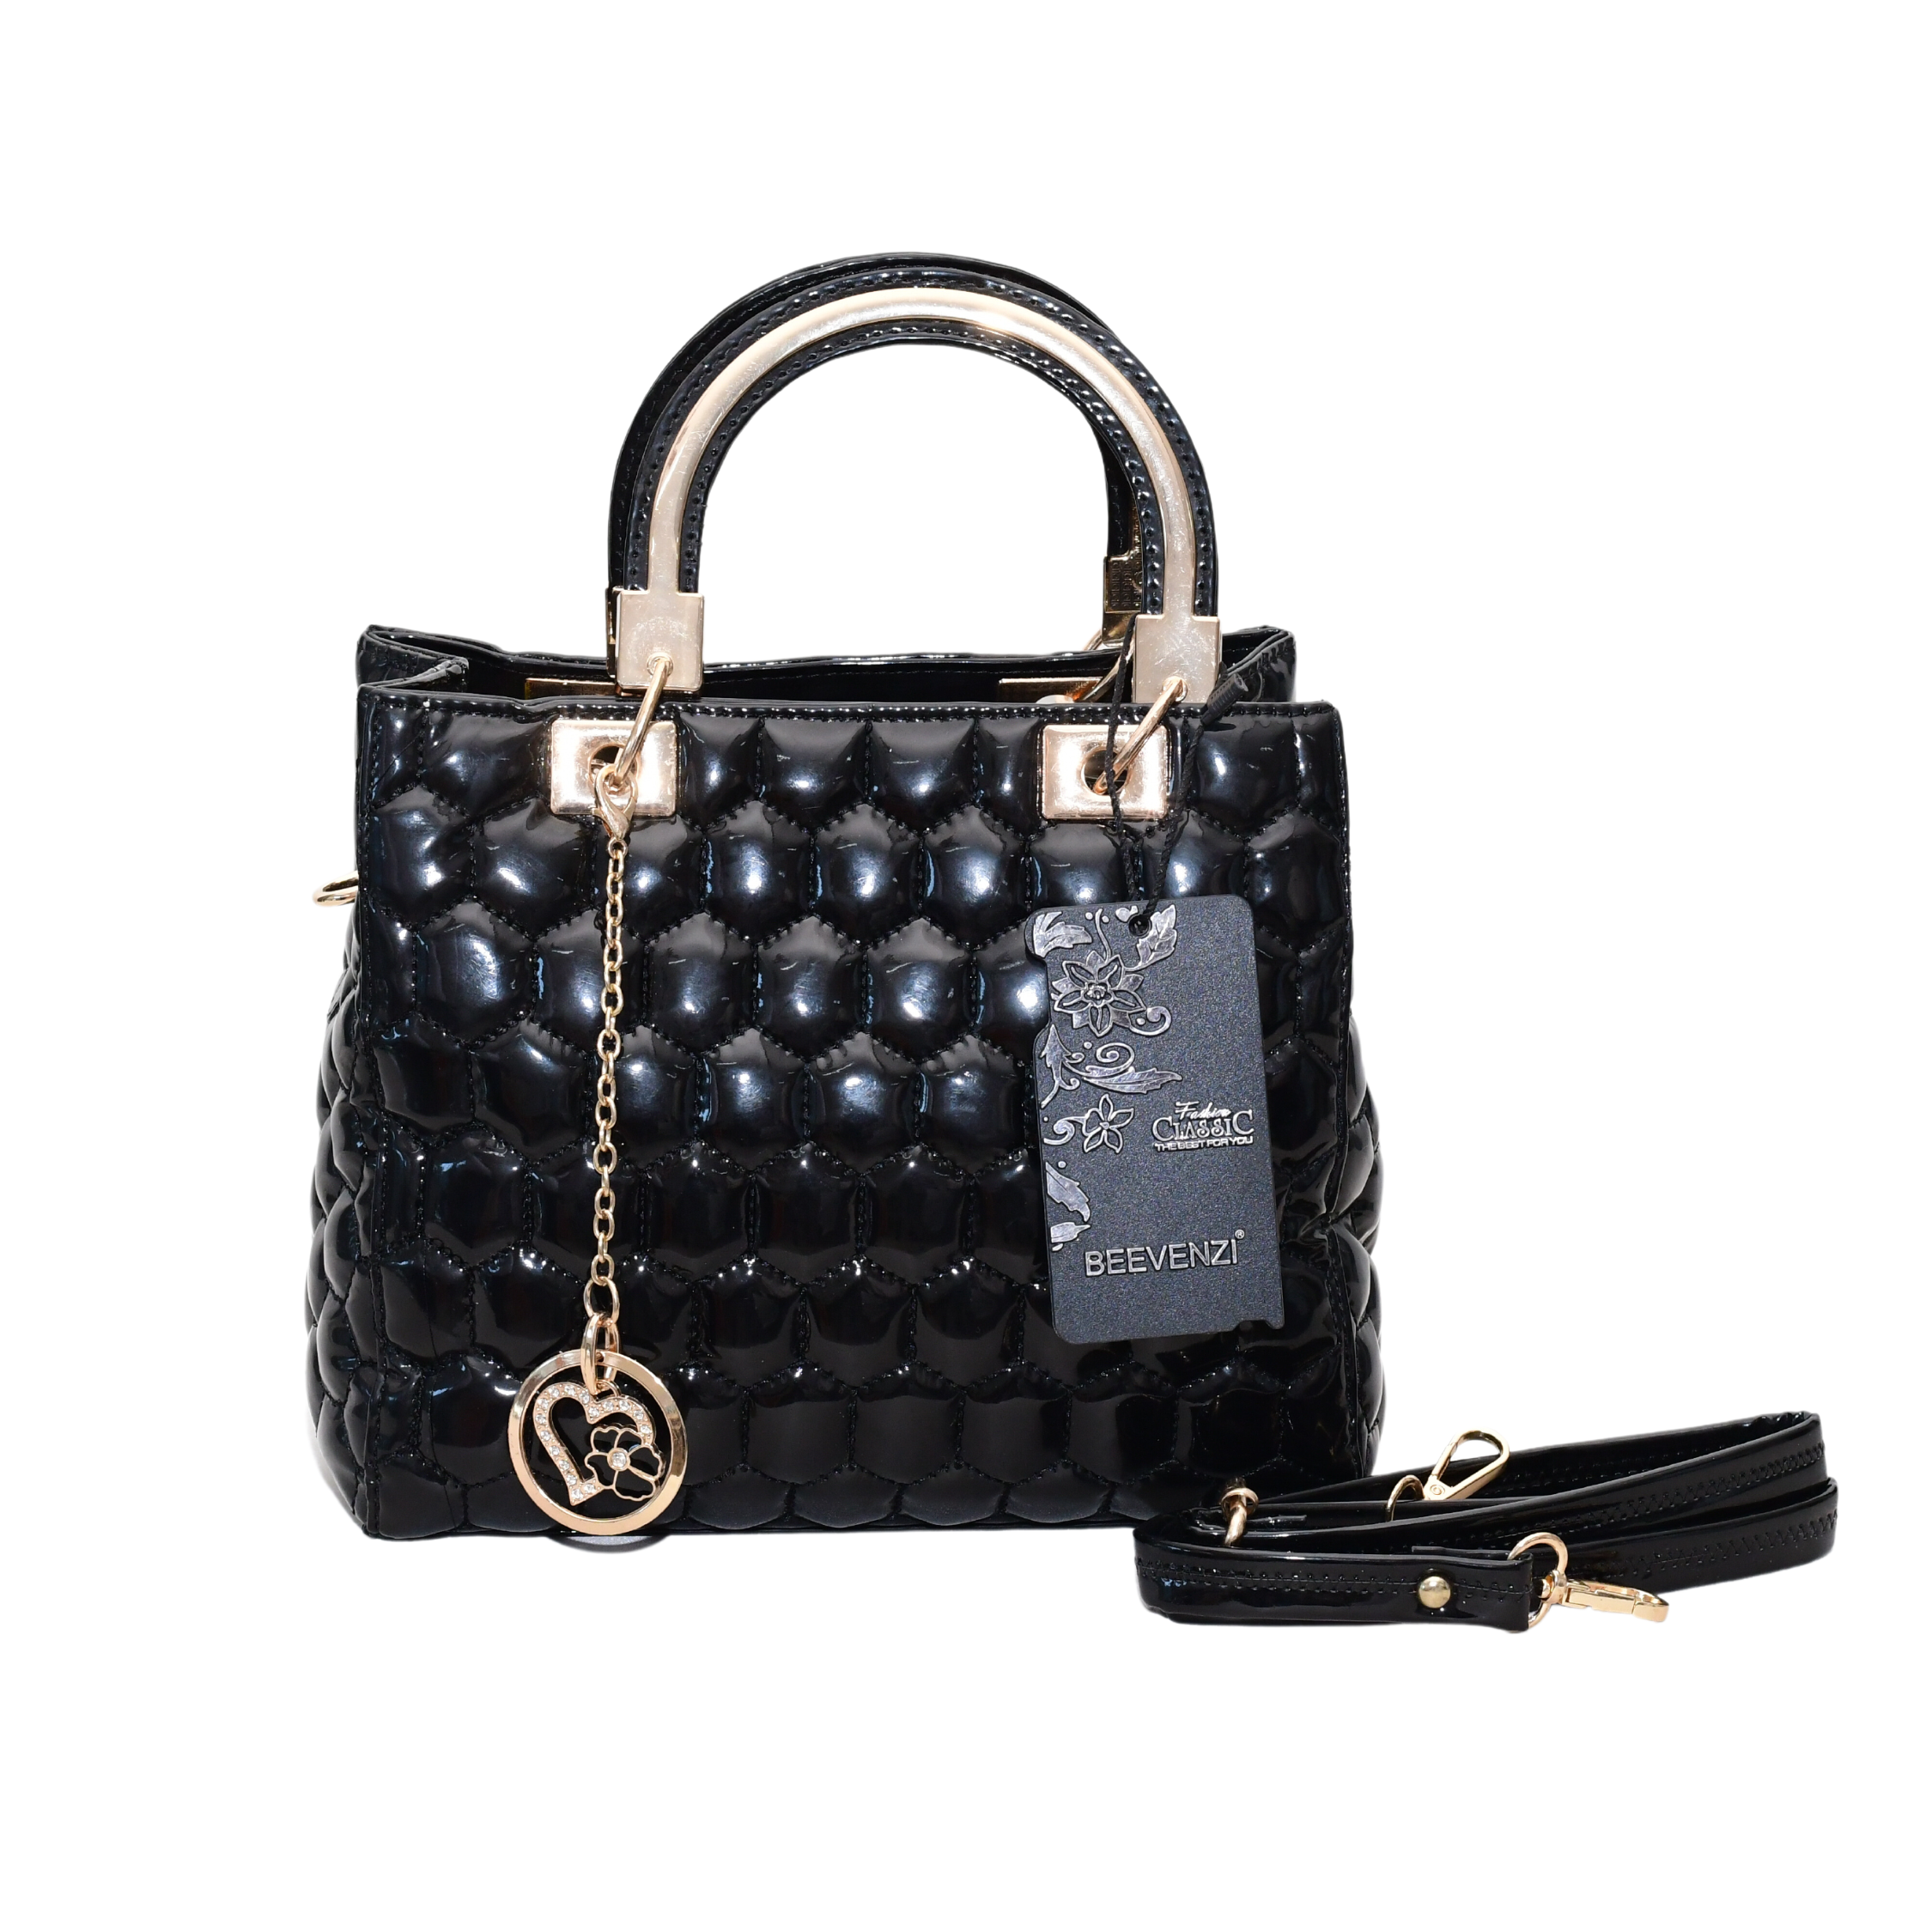 Women Handbags Premium Sheen quilted leather , hand crafted with International quality fittings.